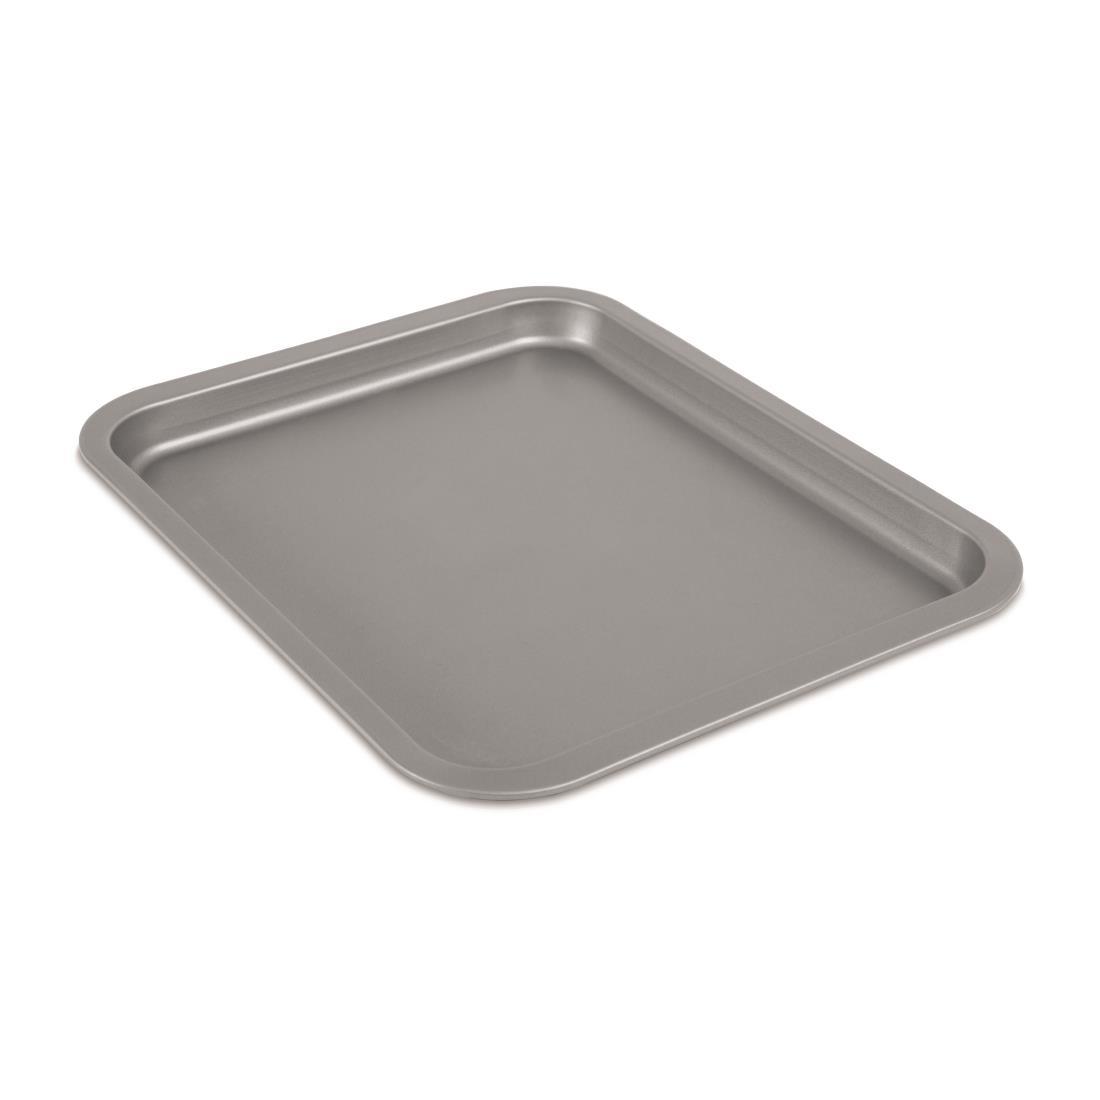 Nisbets Essentials Non Stick Baking Trays (Pack of 3) - DW097 - Buy Online  at Nisbets